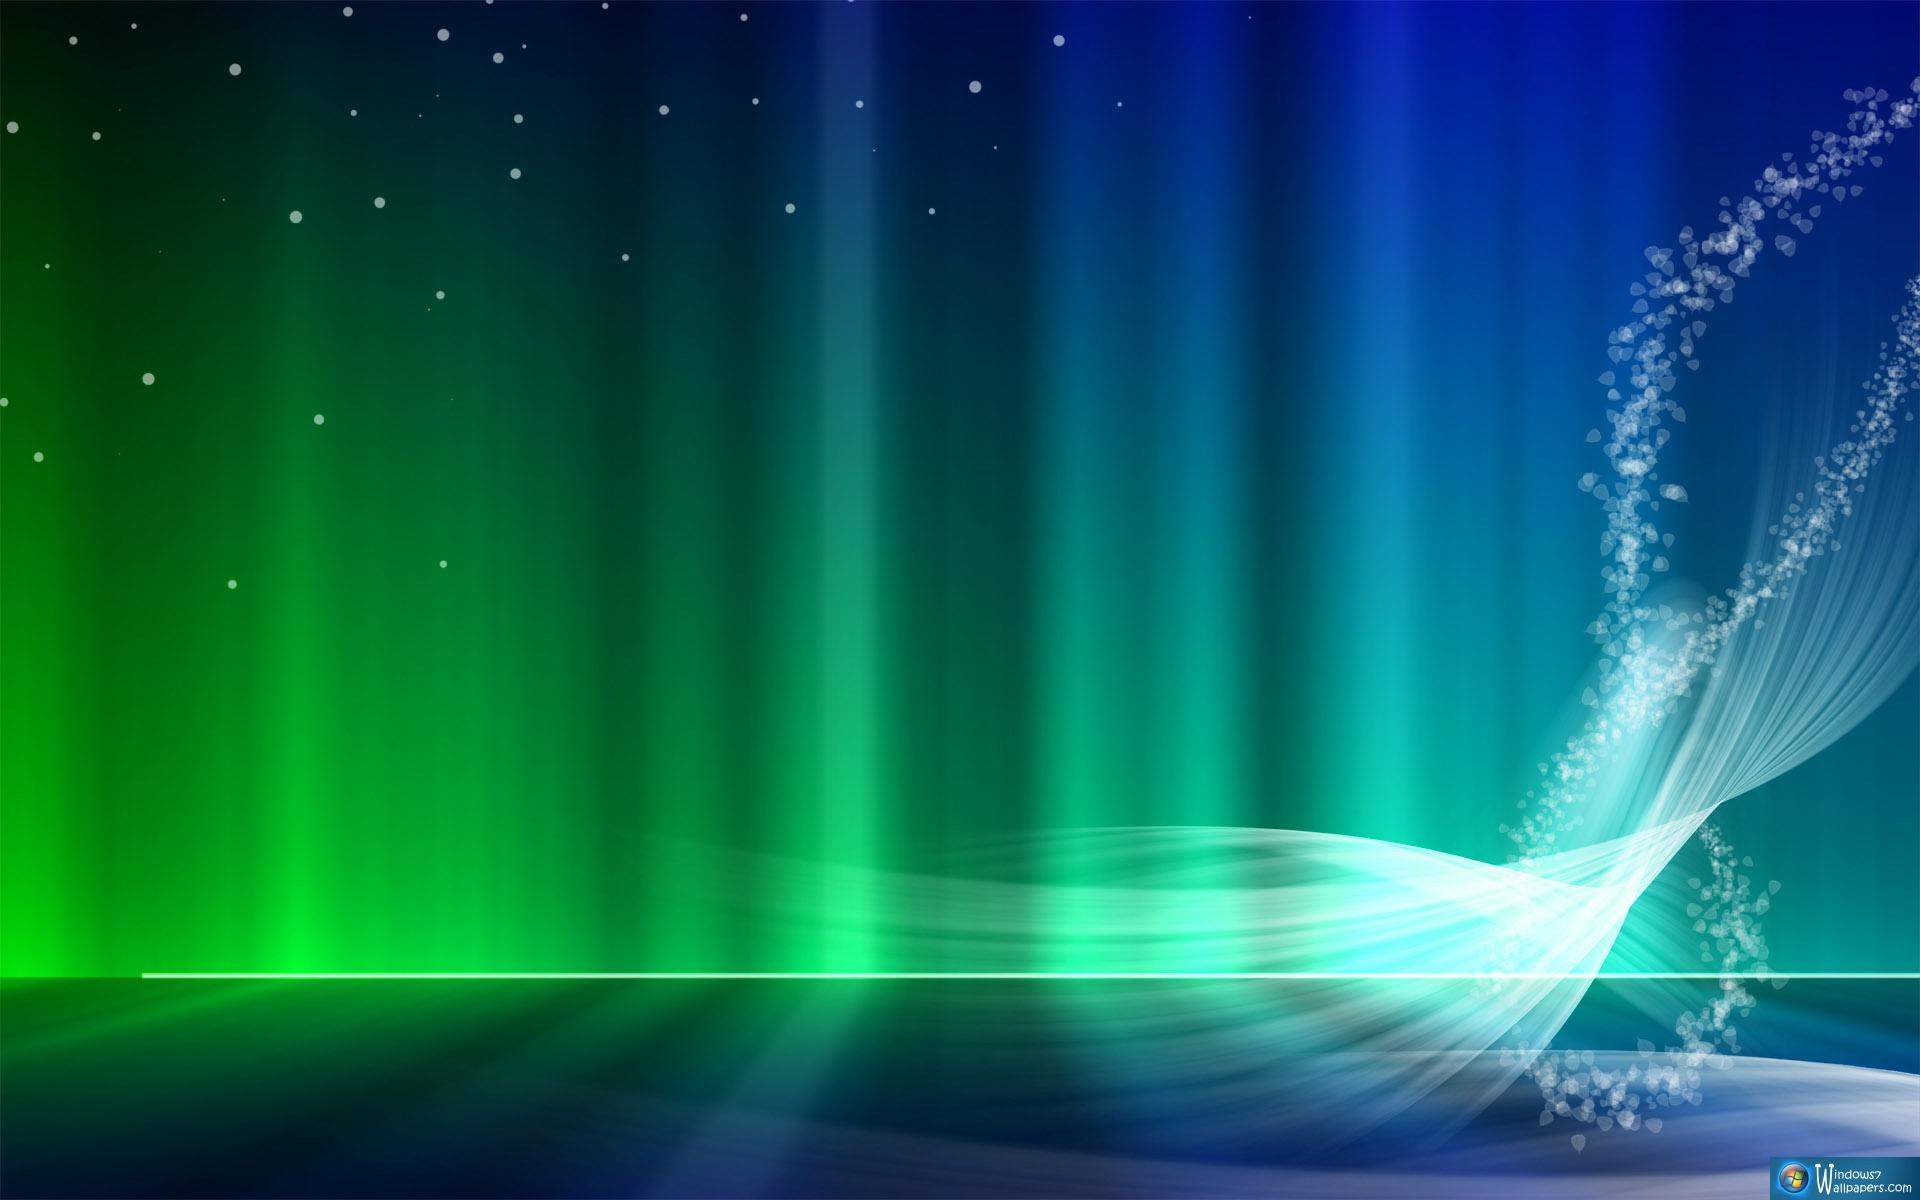 Windows Free Backgrounds - Wallpaper Cave